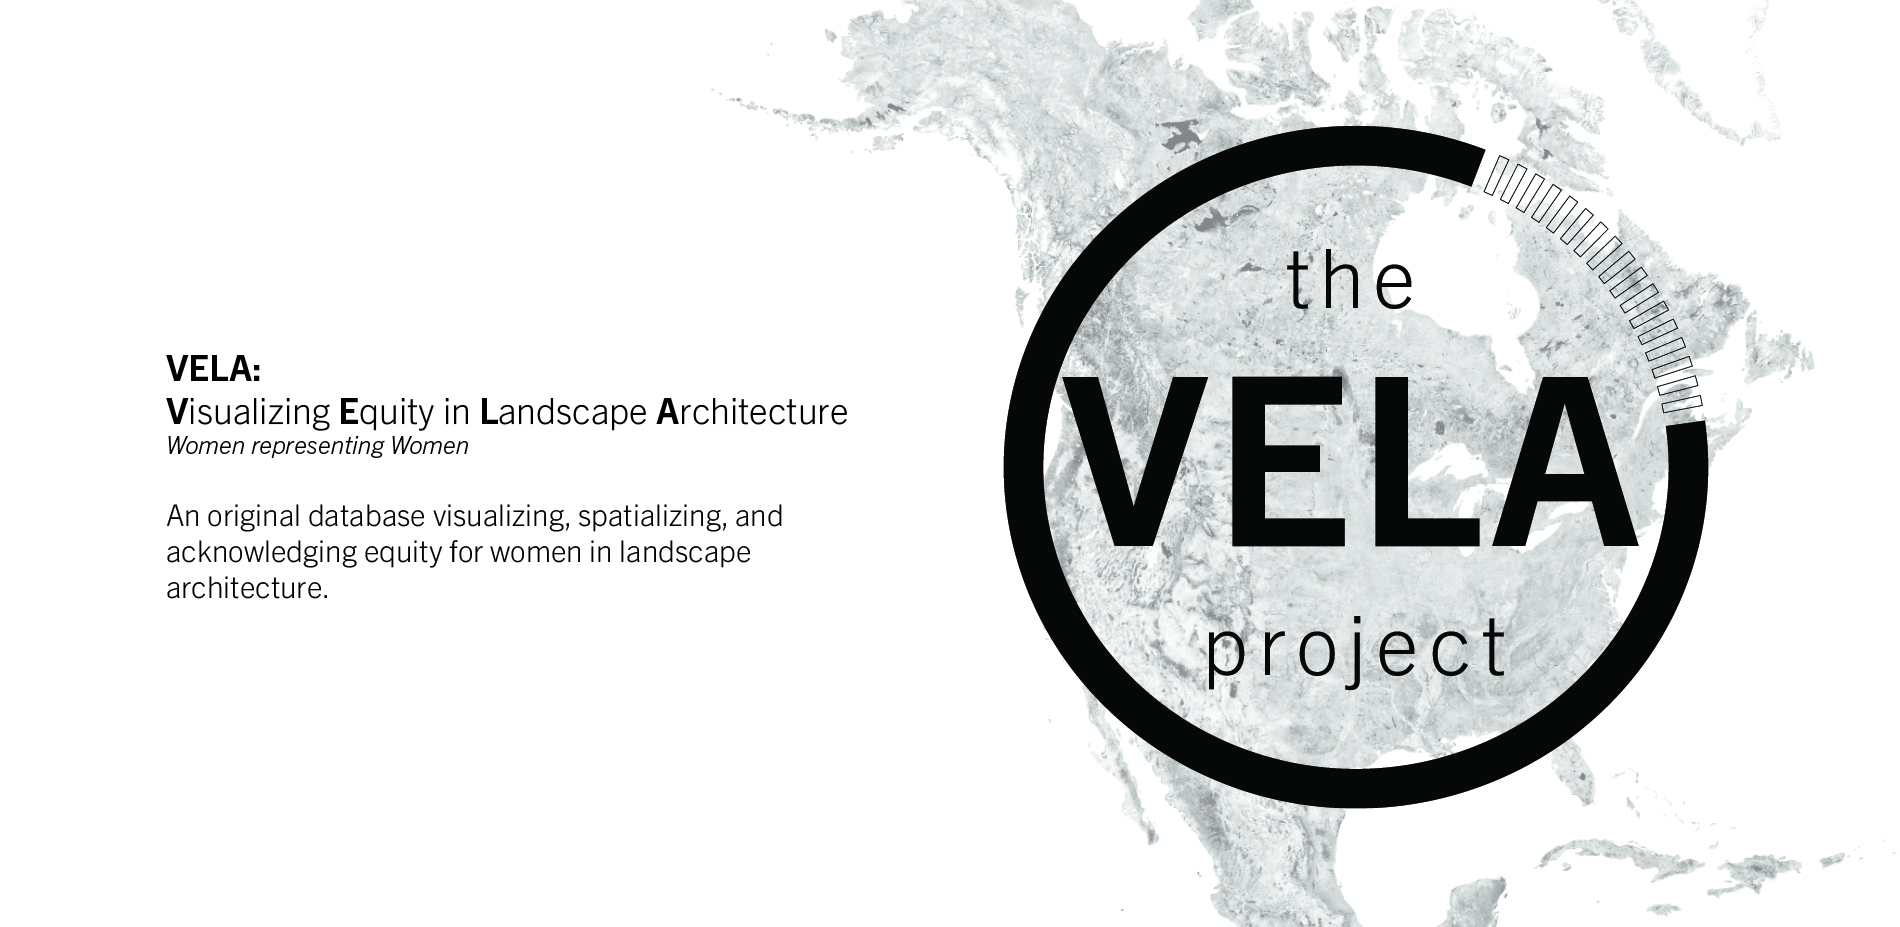 The VELA Project